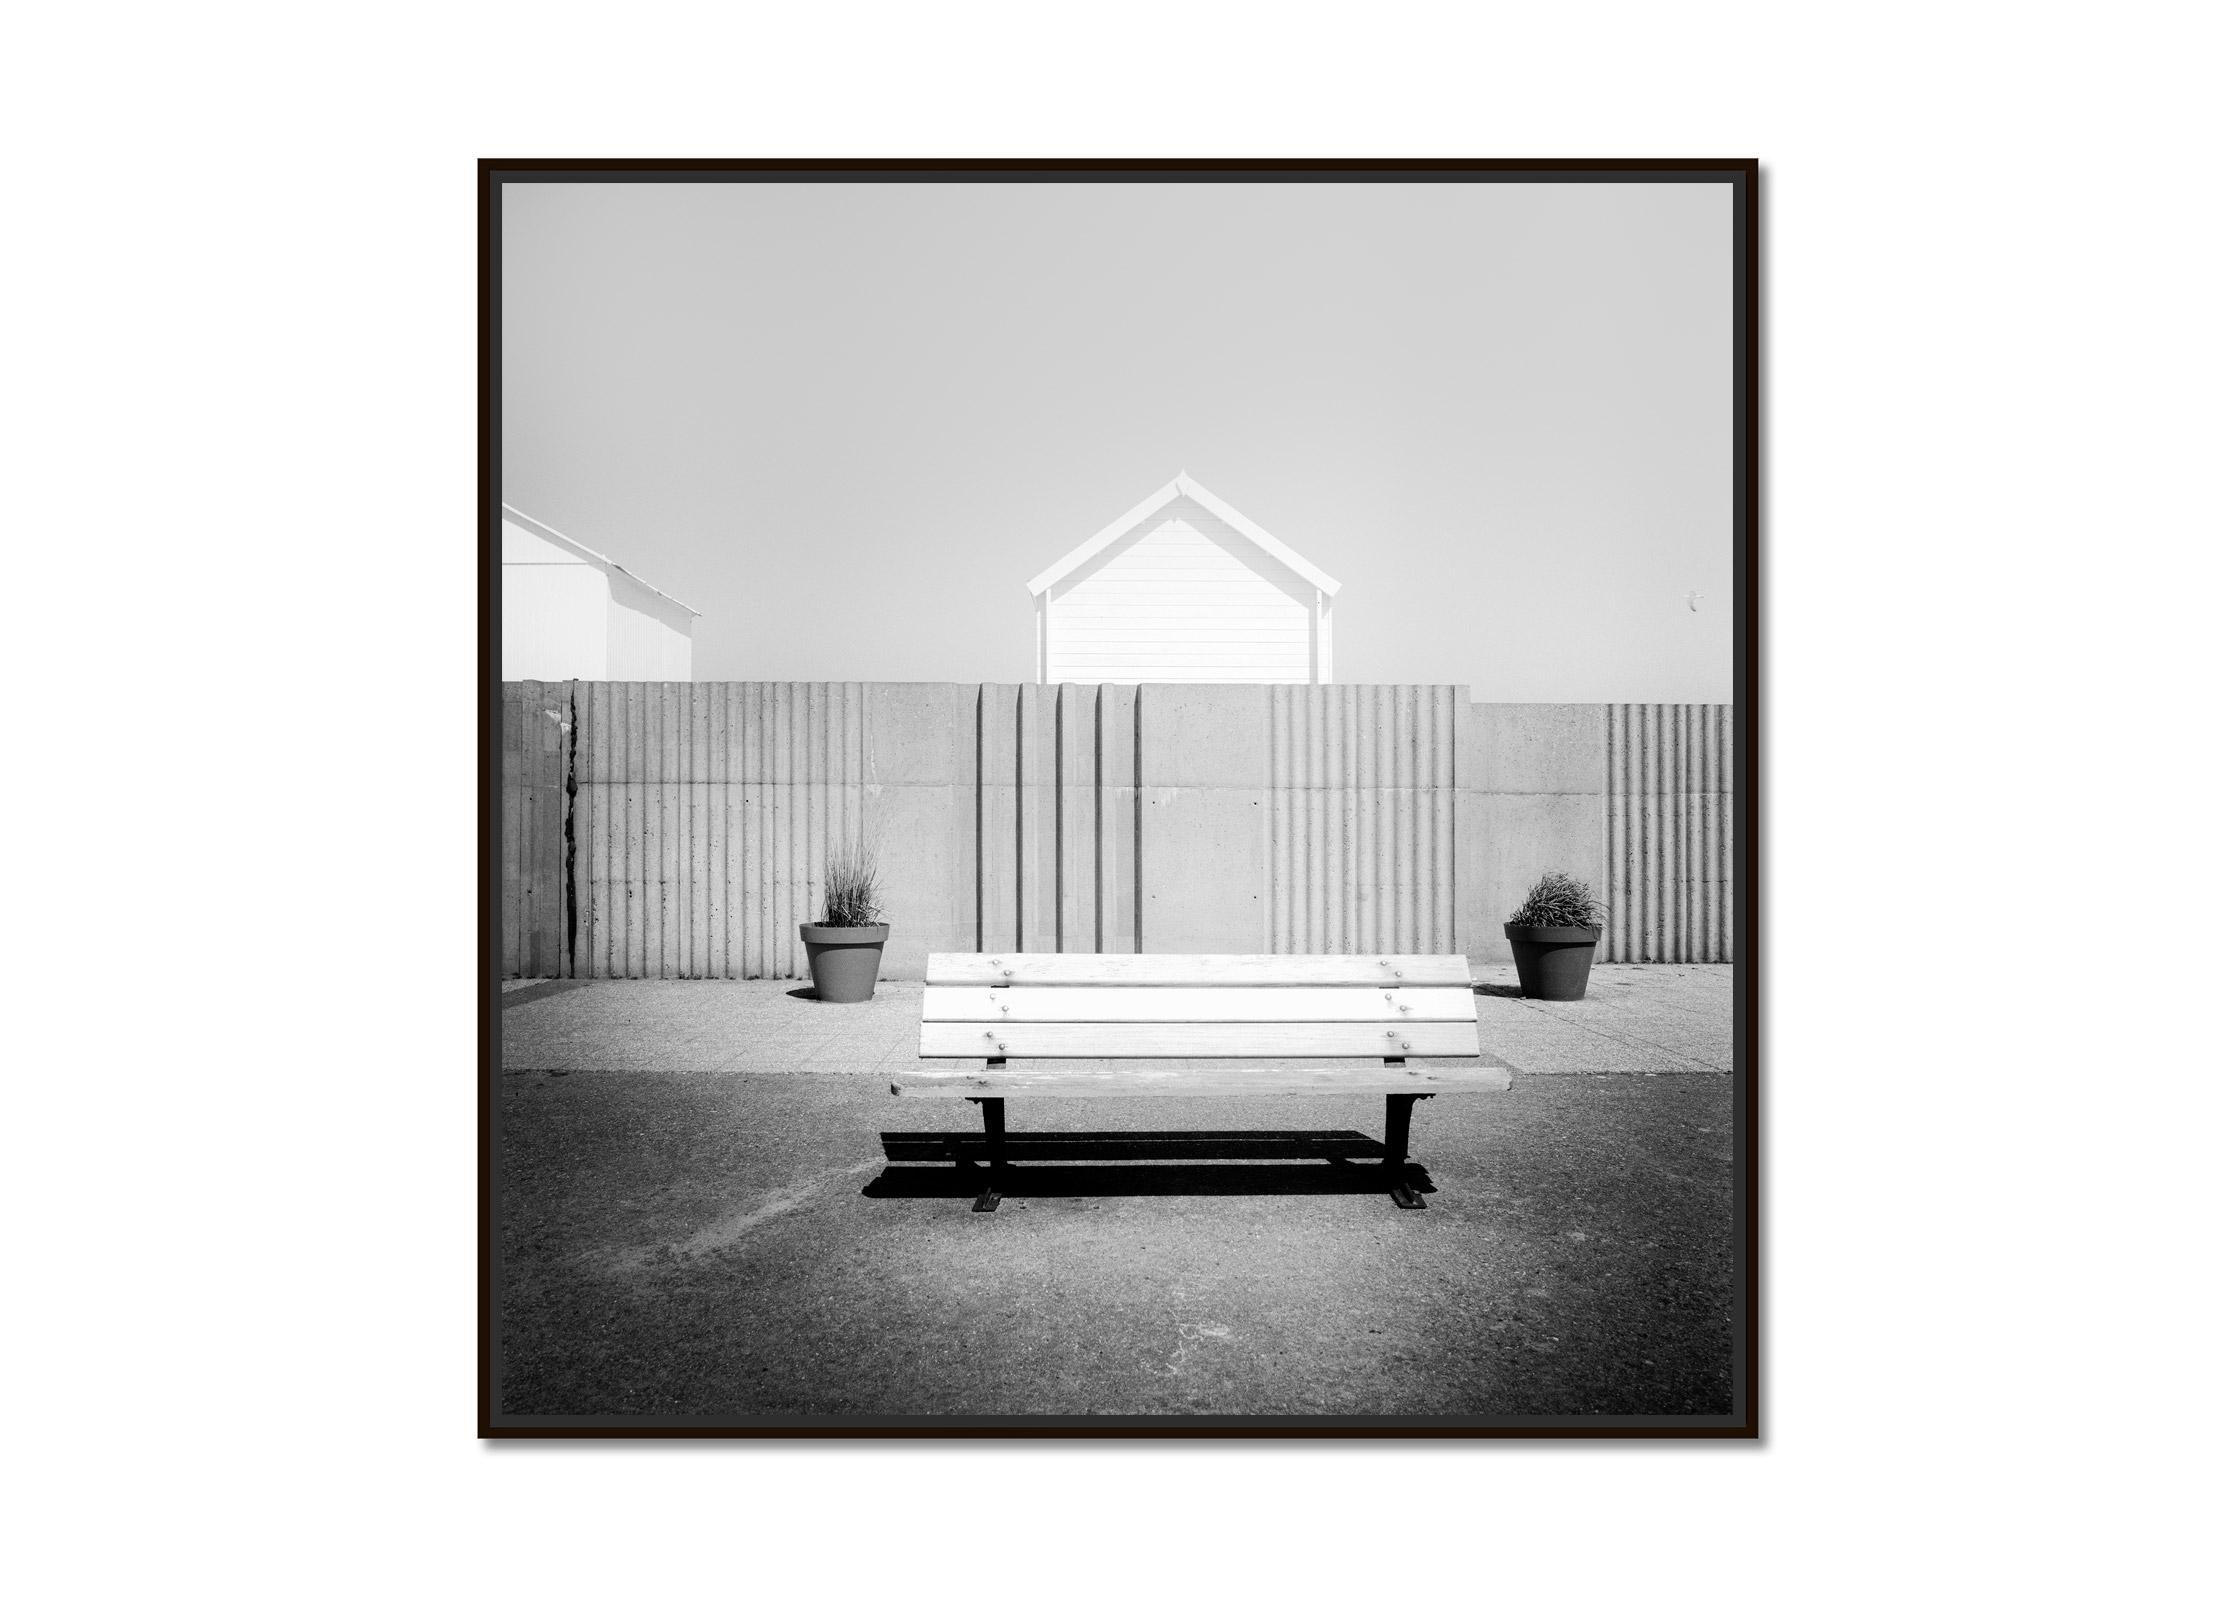 Esplanade, beach life, France, black and white, art landscape, photography - Photograph by Gerald Berghammer